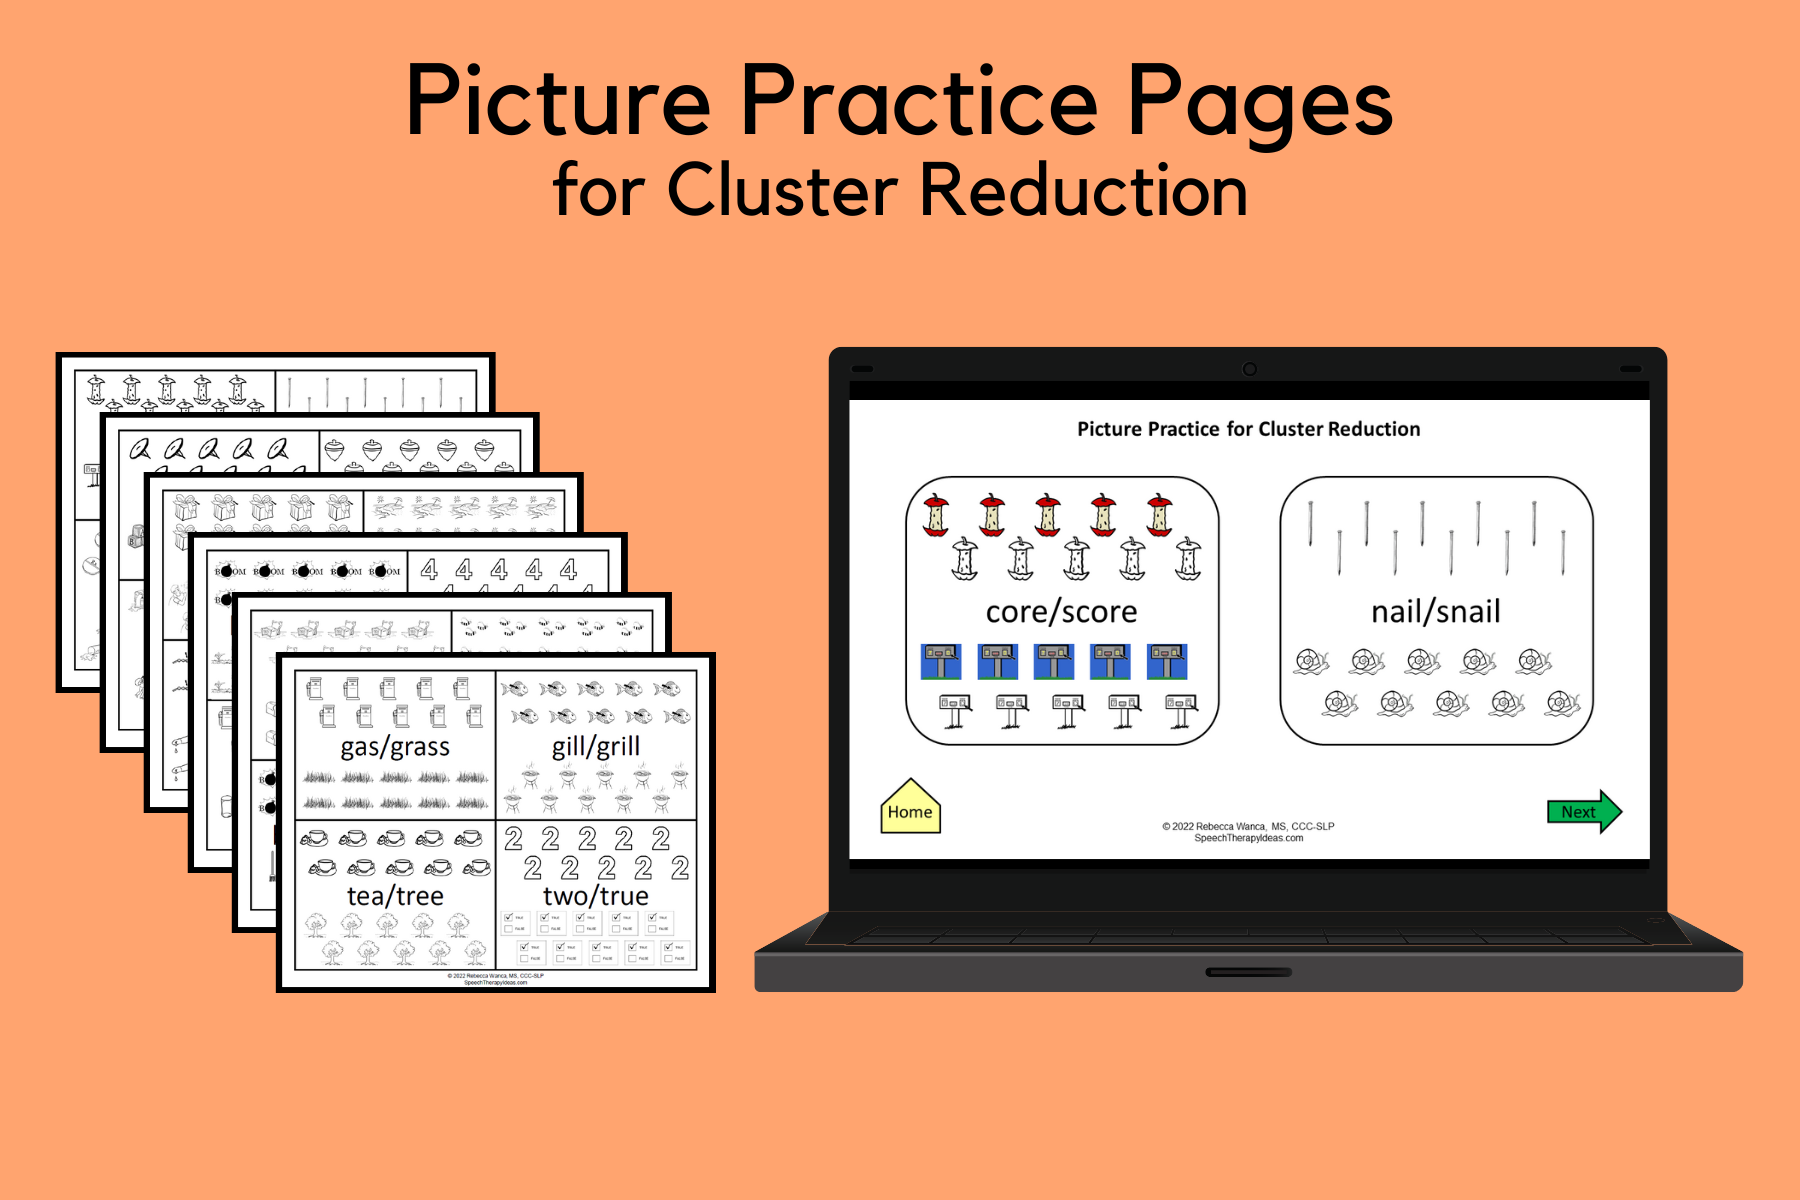 Picture Practice Pages for Cluster Reduction